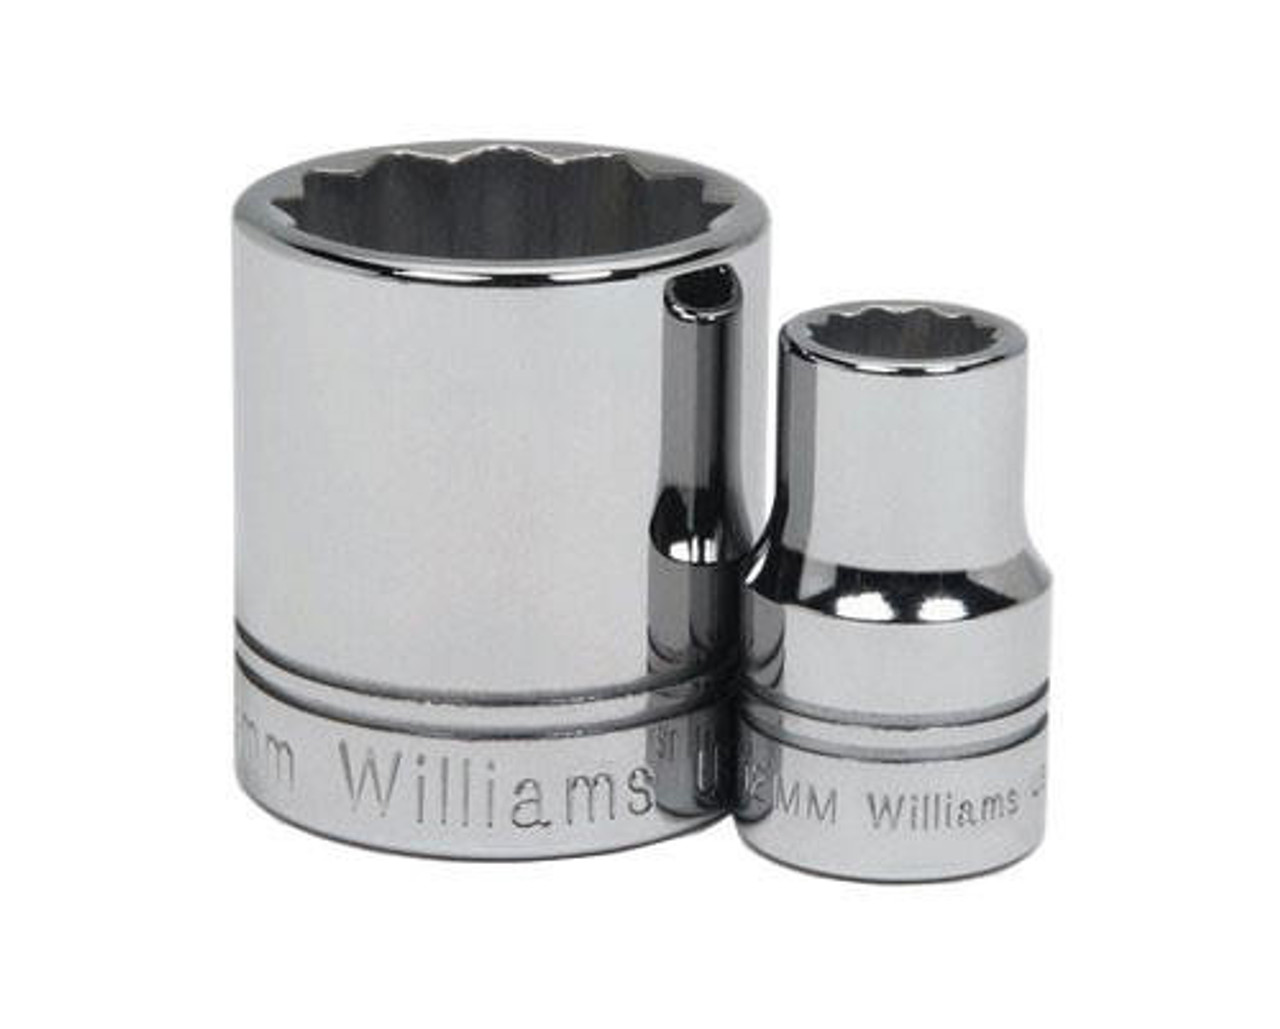 Williams Made In USA 22MM Williams 1/2" Dr Shallow Socket 12 Pt - STM-1222 